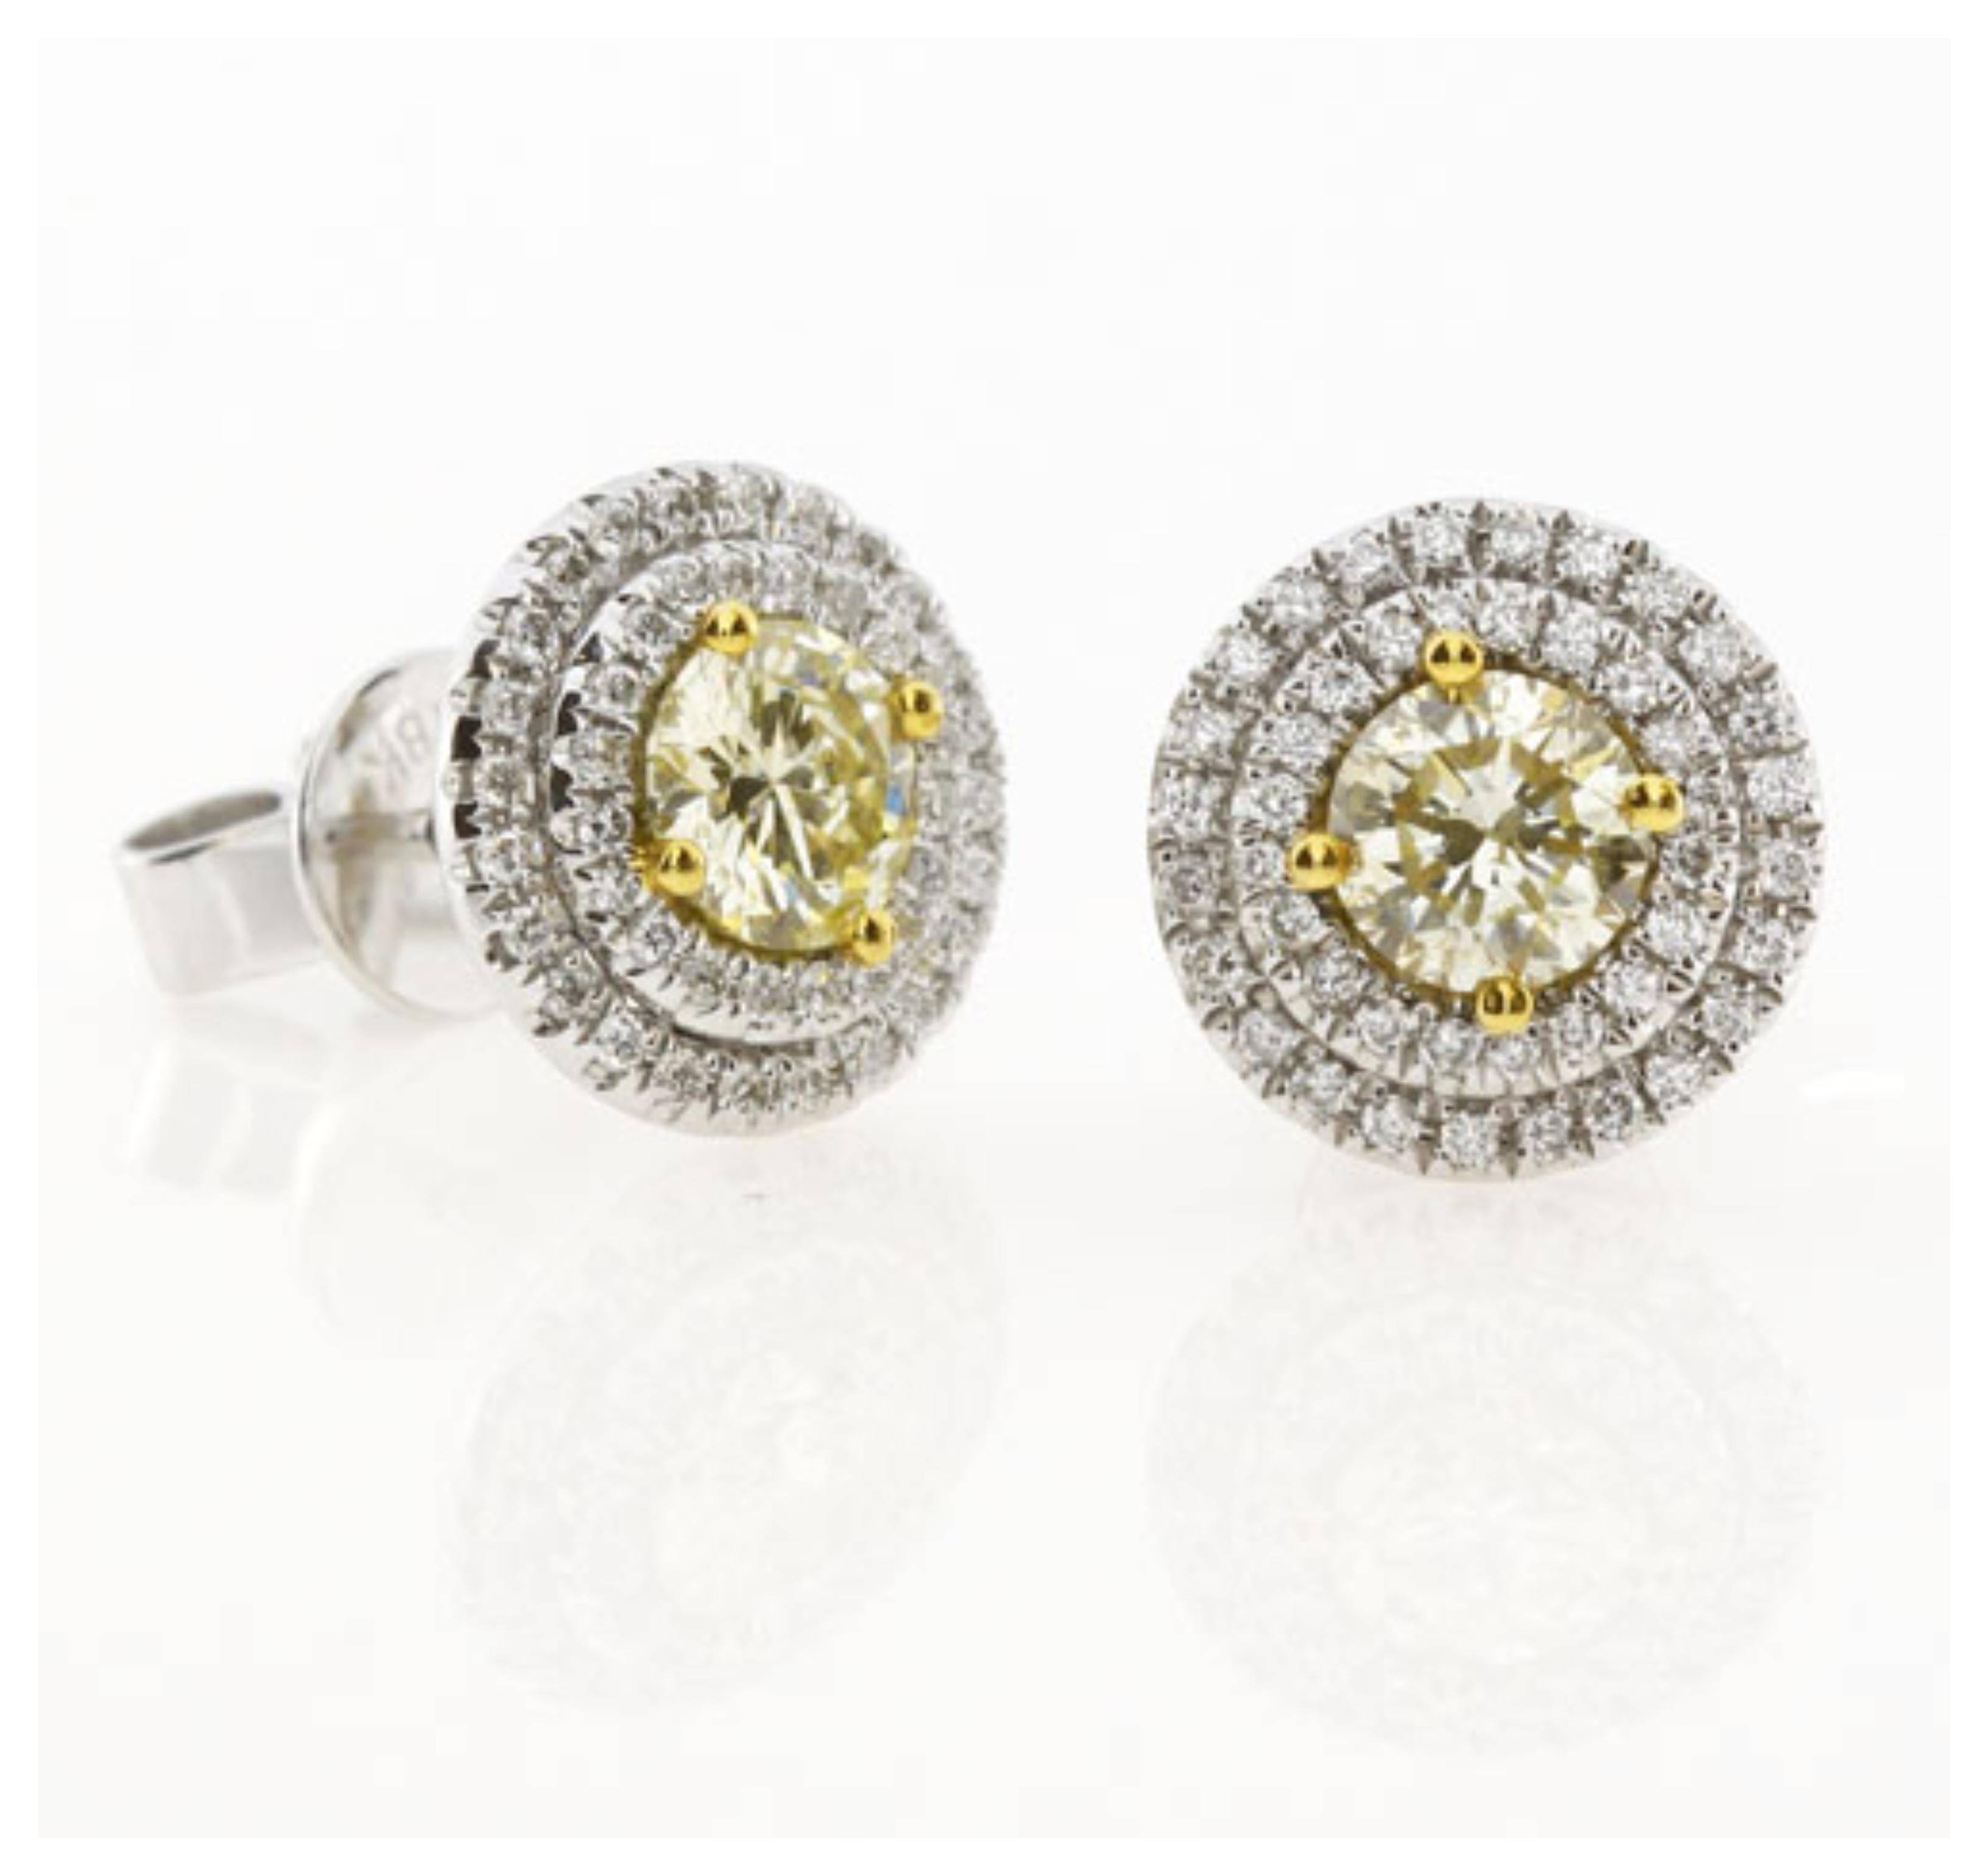 1.00 Carat Natural Fancy Yellow Diamond Stud Earrings featuring two round Natural Fancy Yellow Diamonds (.51 Carat each) surrounded by two rows of accent white diamonds. 
Total Carat Weight: 1.36 Carat
Yellow Diamonds: 1.02 Carat (total 2